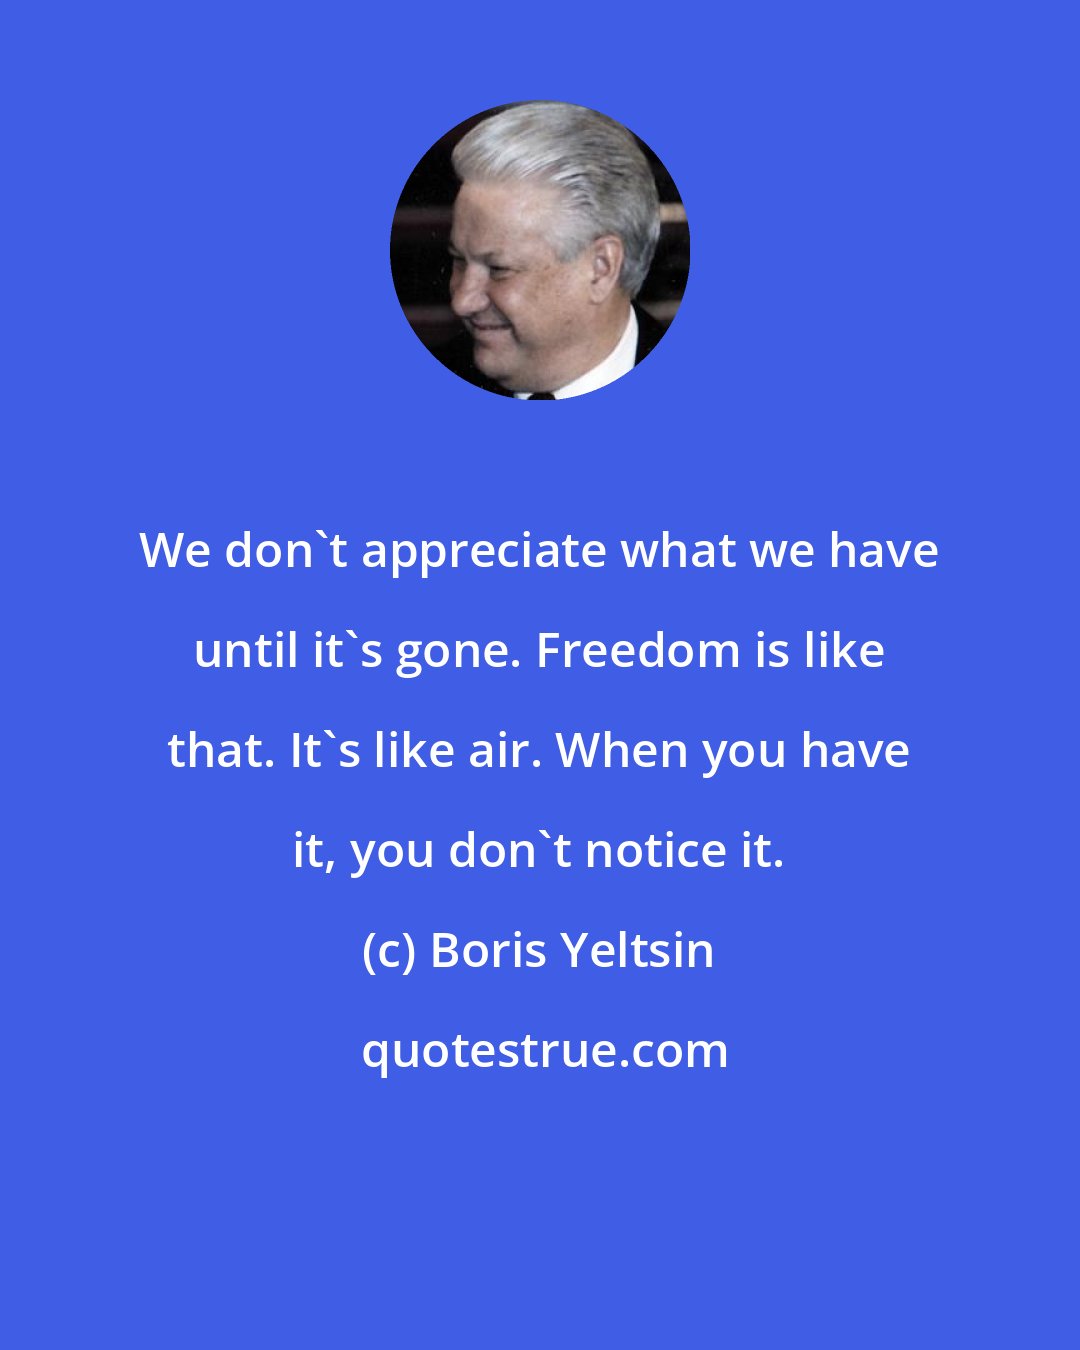 Boris Yeltsin: We don't appreciate what we have until it's gone. Freedom is like that. It's like air. When you have it, you don't notice it.